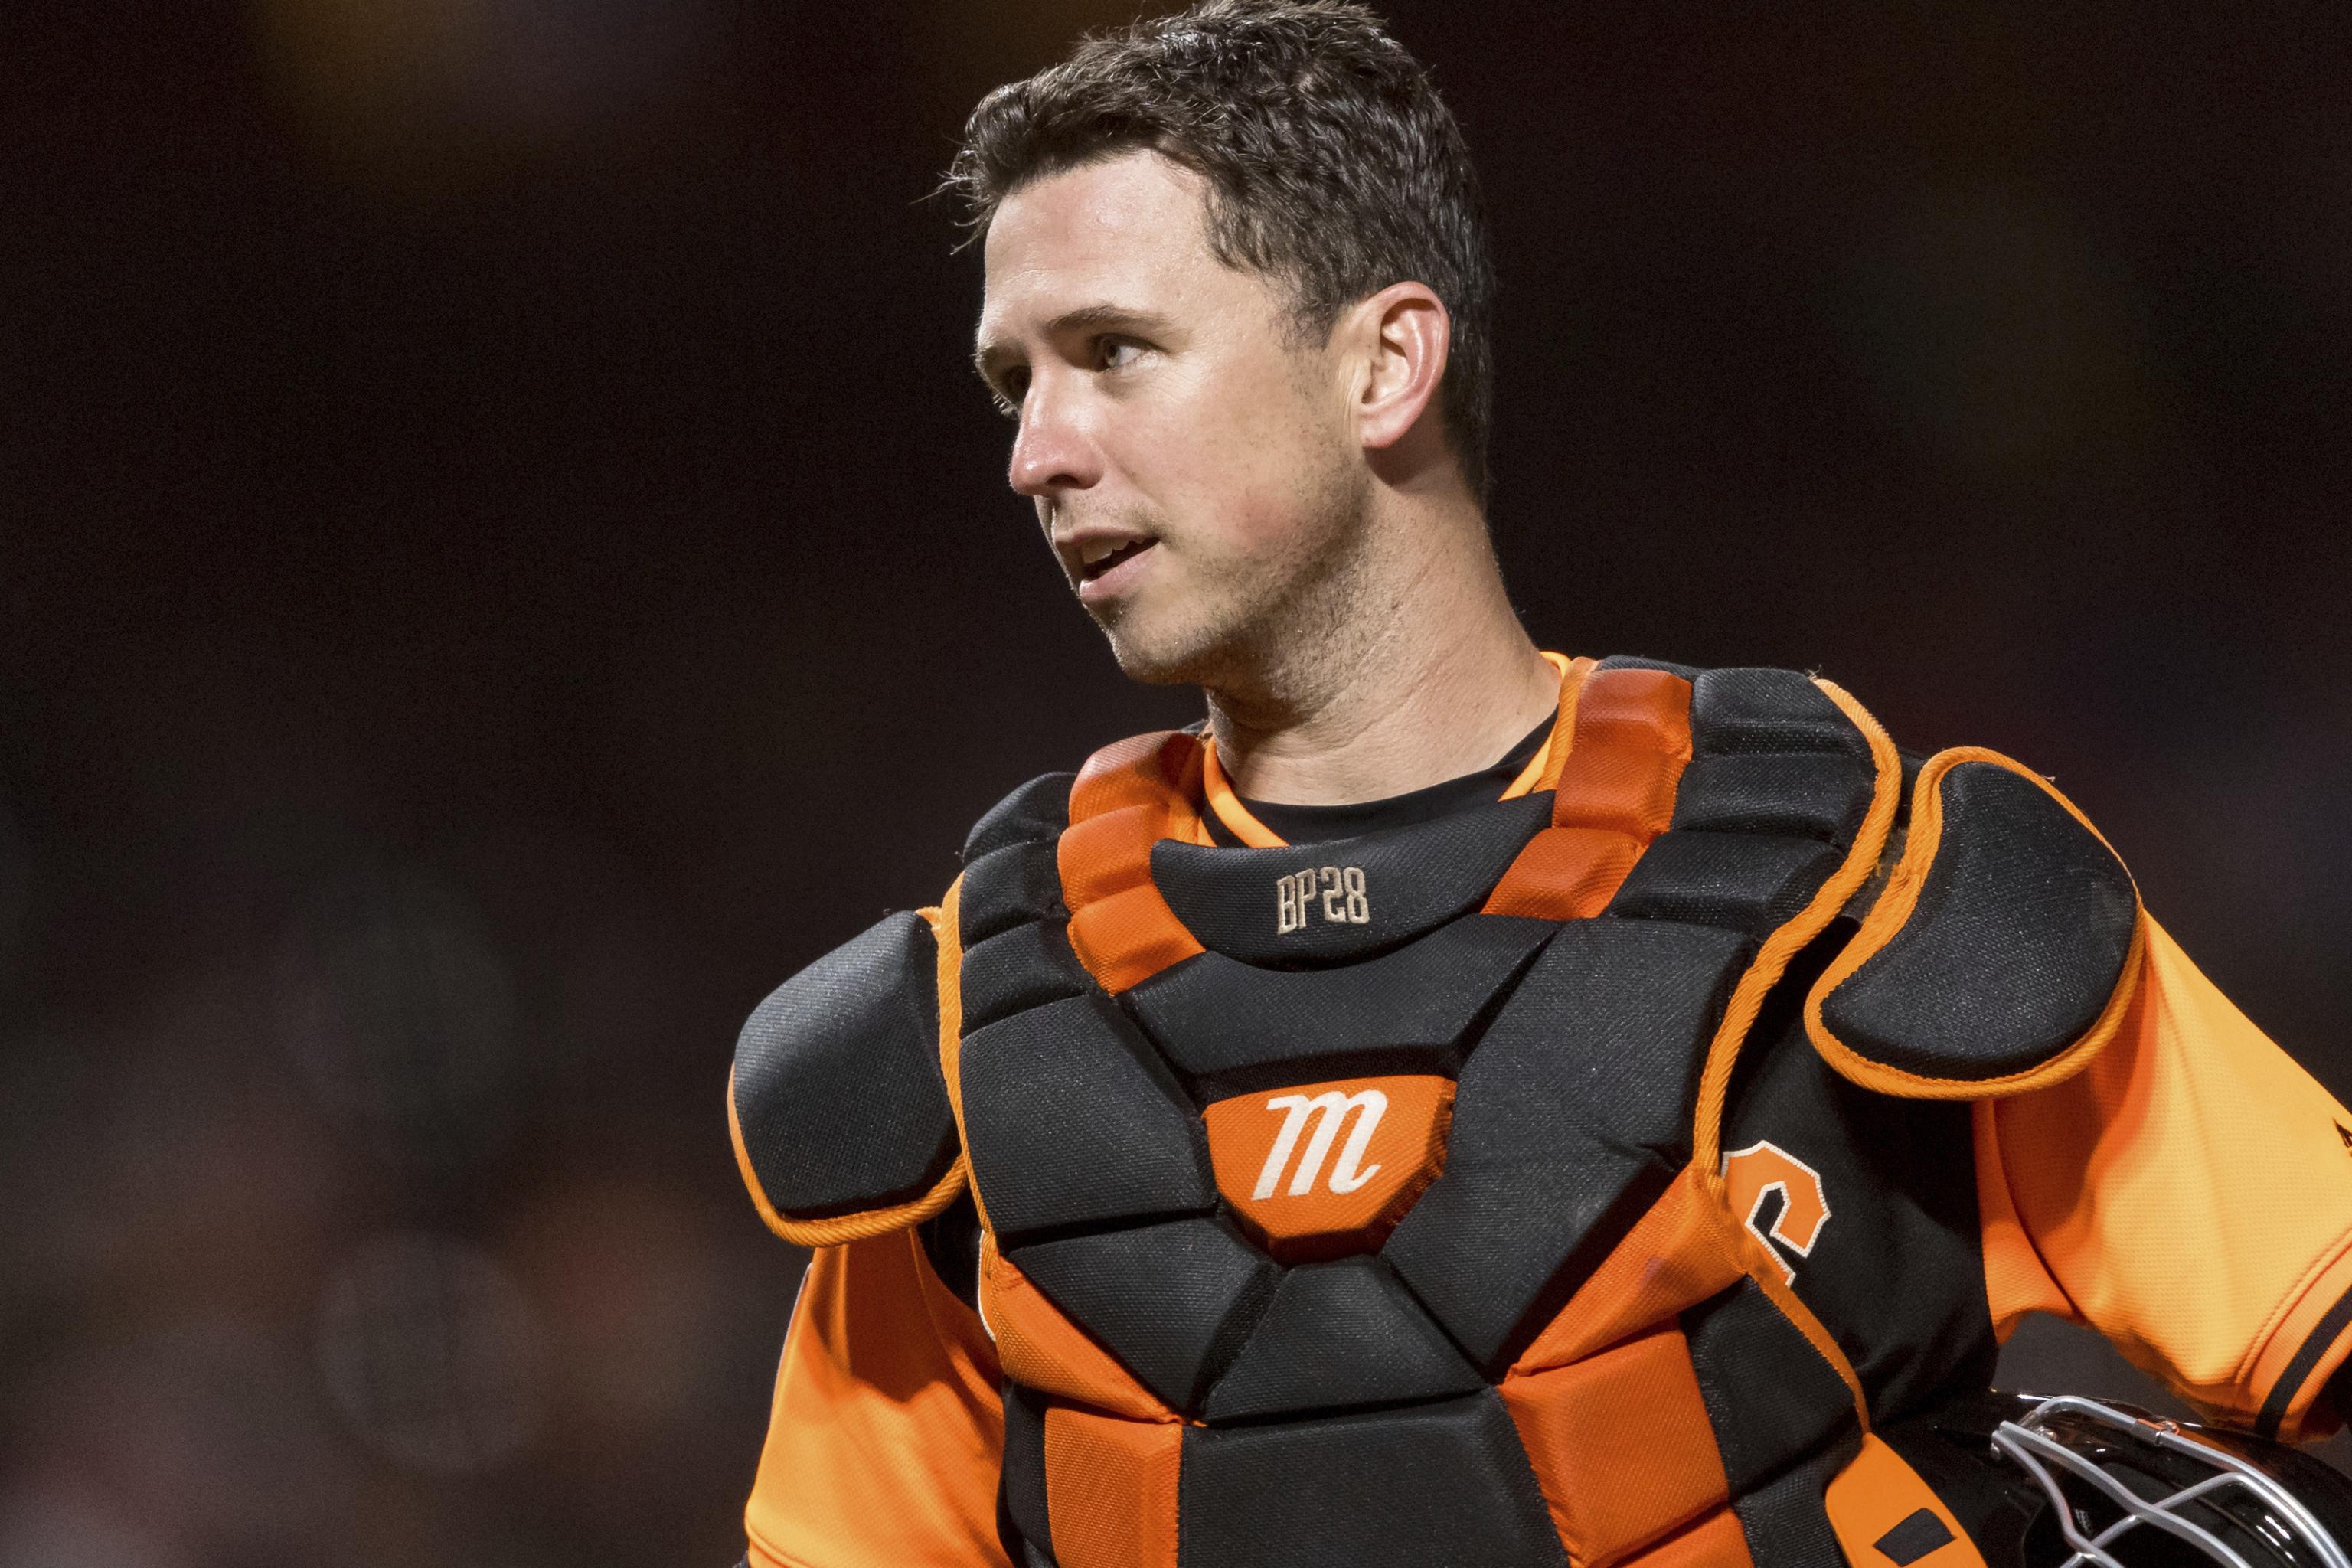 Buster Posey Retires - Breakpoint